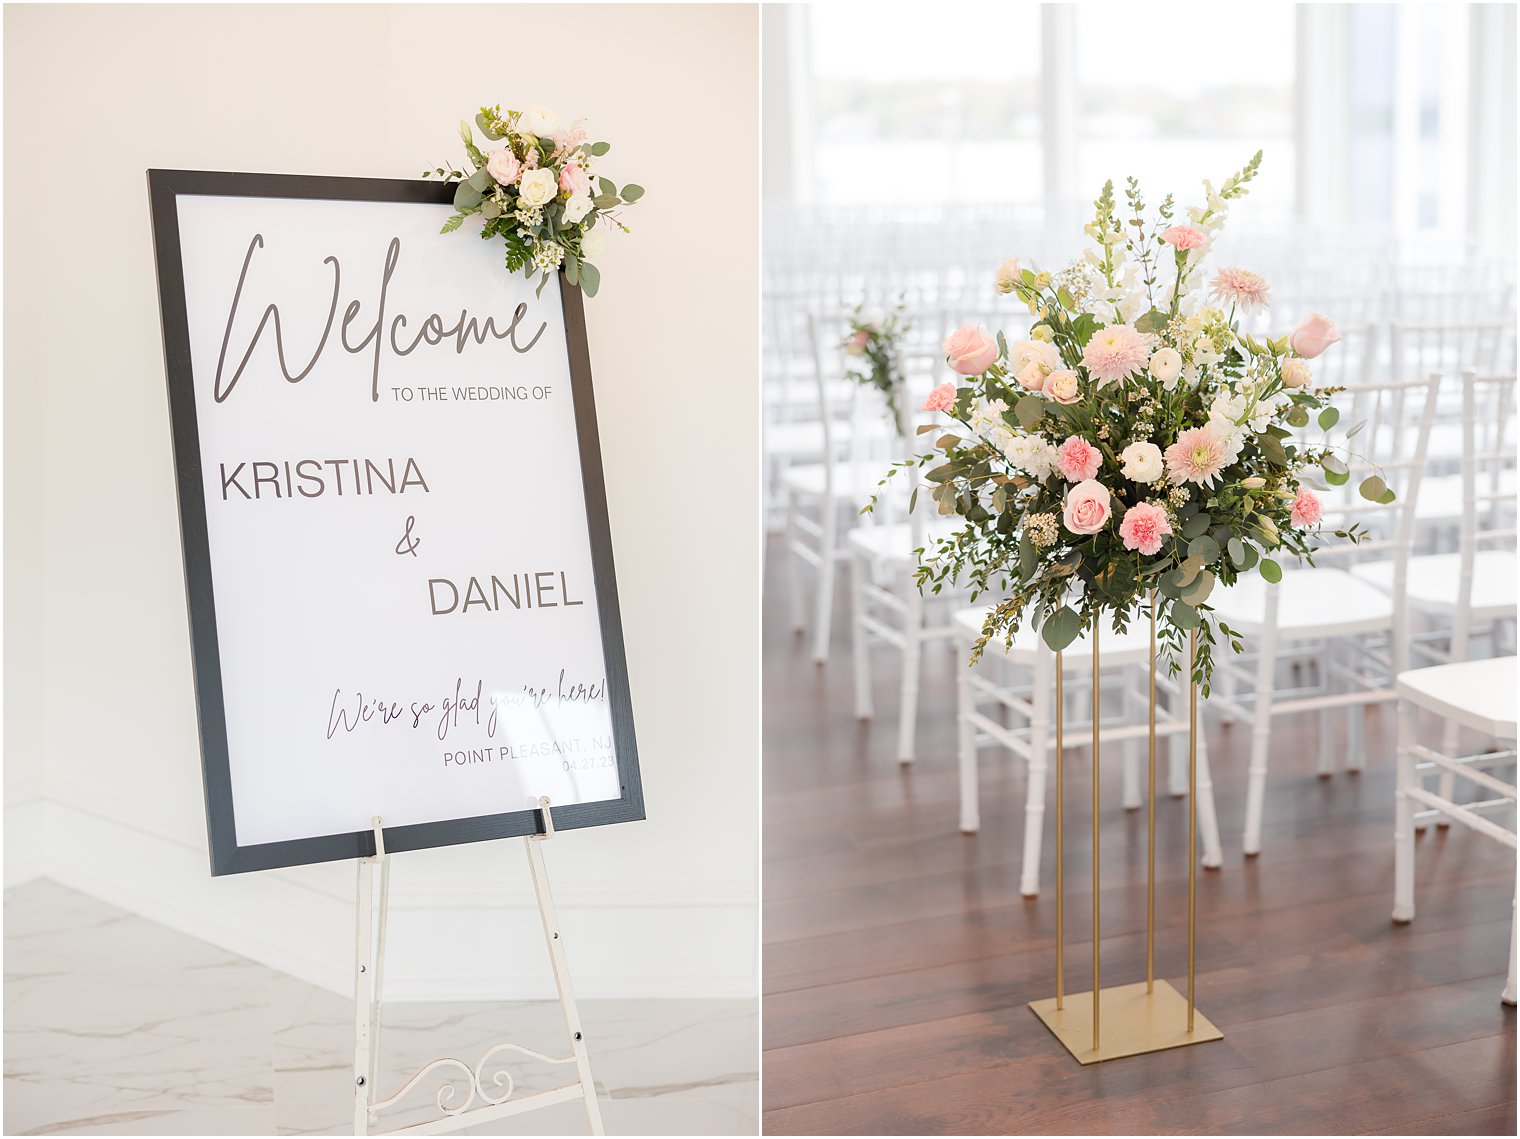 welcome sign and pink and white floral display for ceremony at Clark's Landing Yacht Club